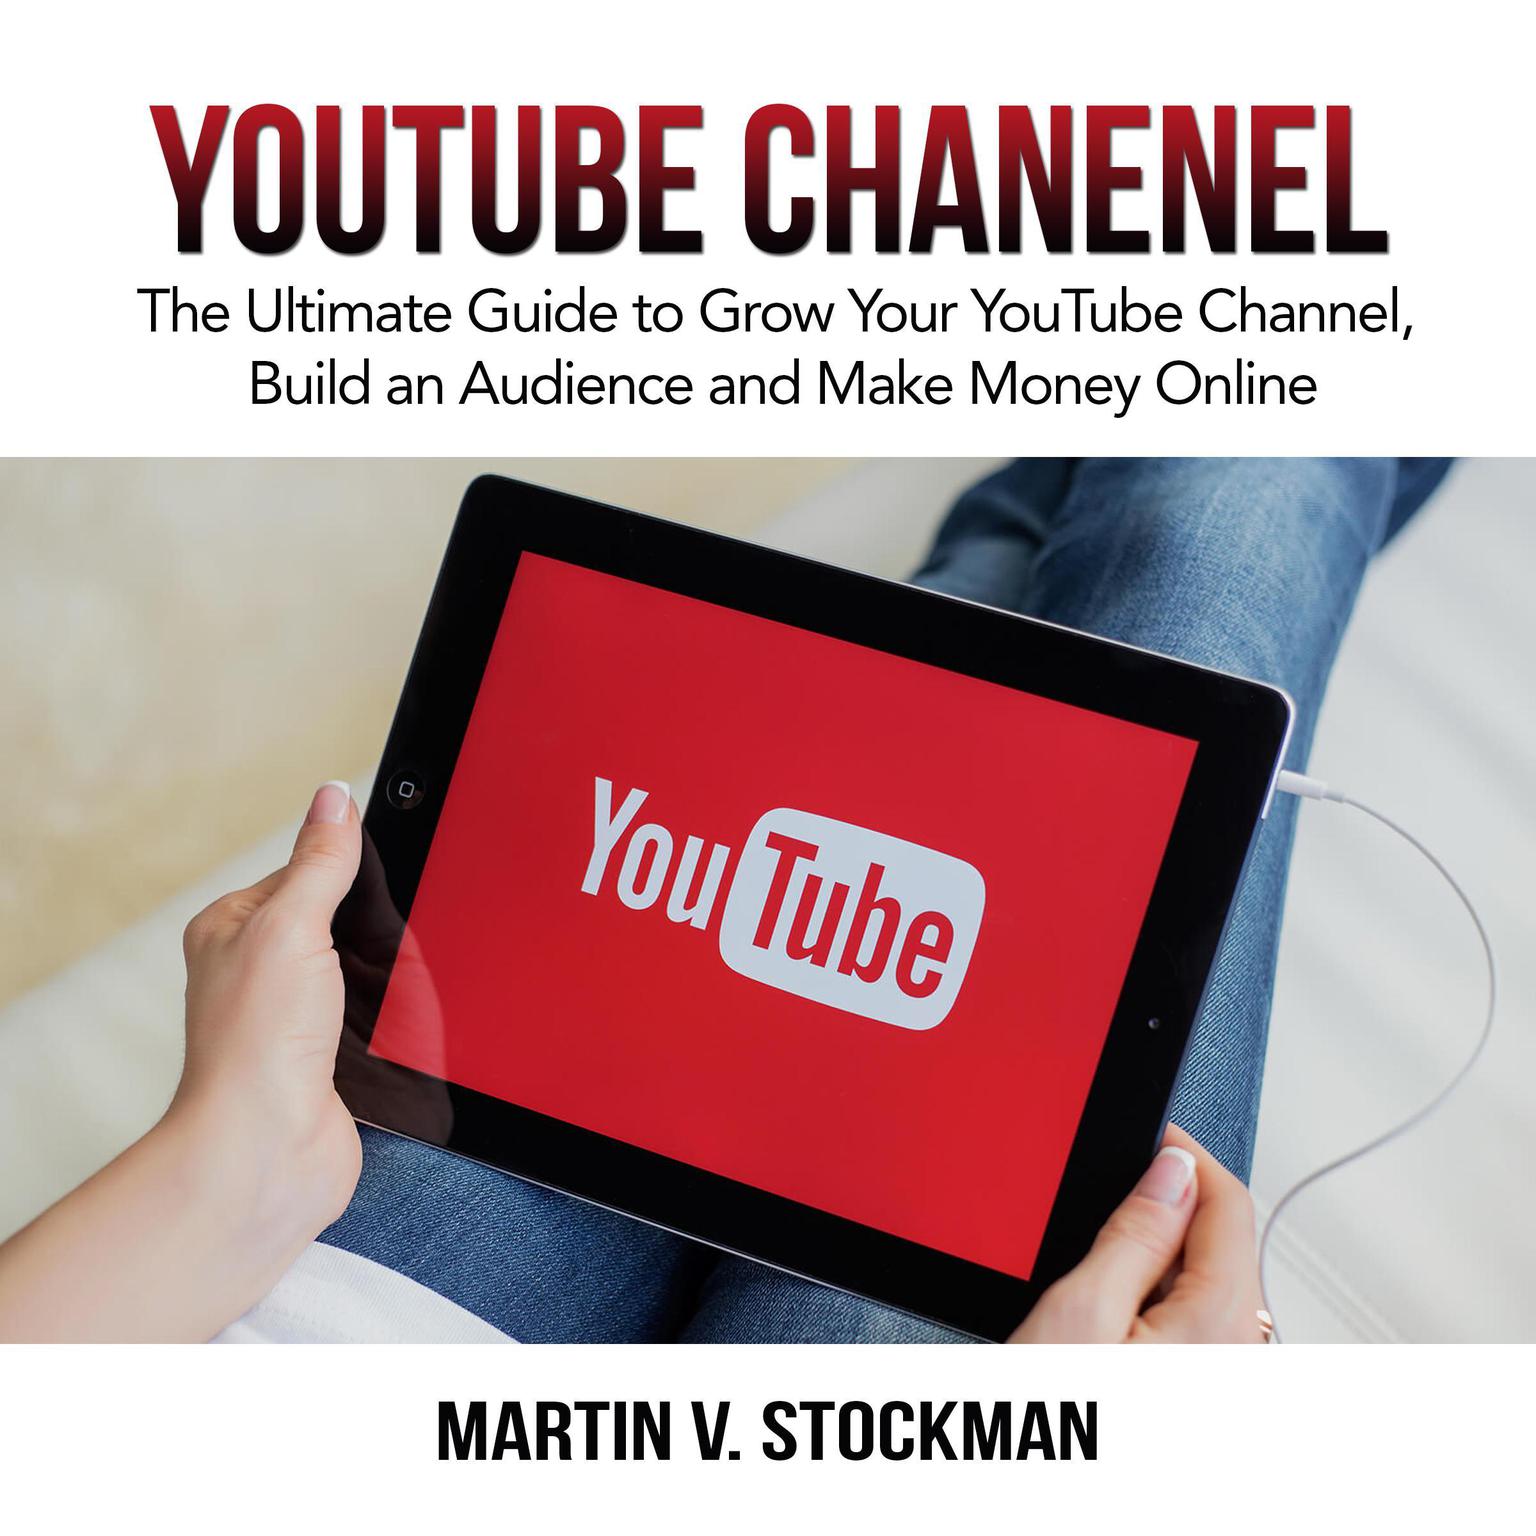 Youtube Channel: The Ultimate Guide to Grow Your YouTube Channel, Build an Audience and Make Money Online Audiobook, by Martin V. Stockman